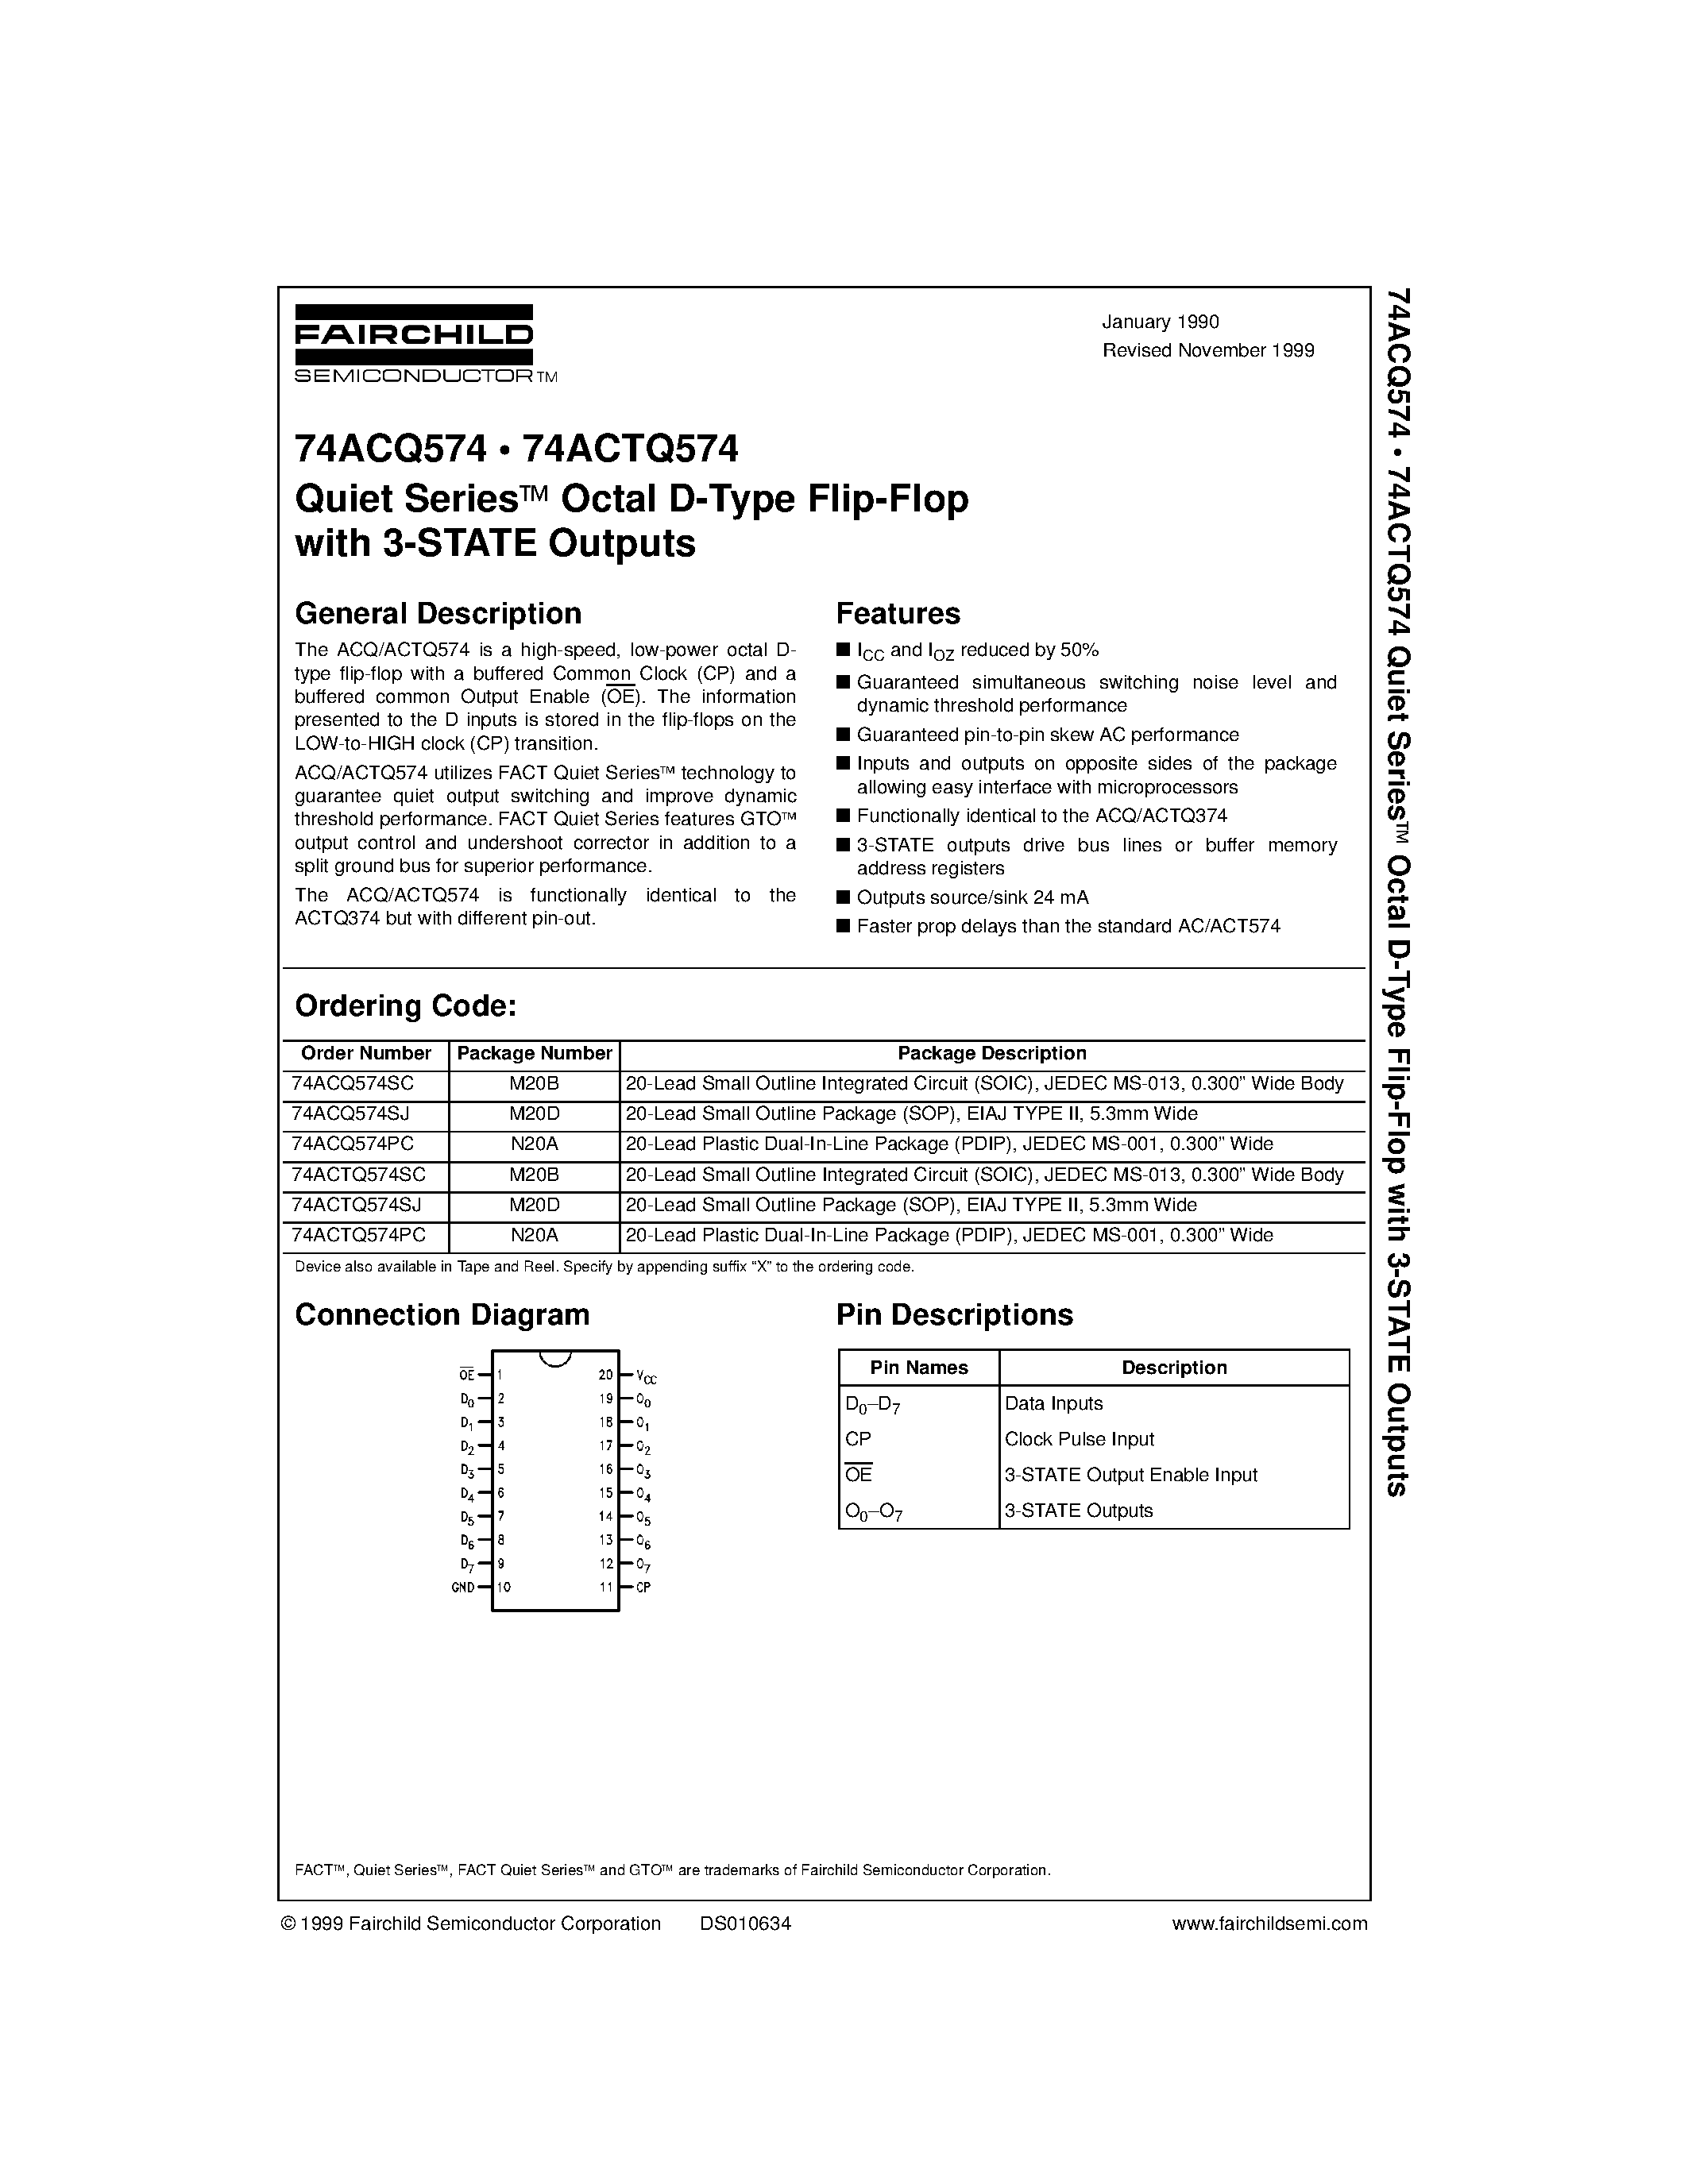 Datasheet 74ACTQ574PC - Quiet Series Octal D-Type Flip-Flop with 3-STATE Outputs page 1